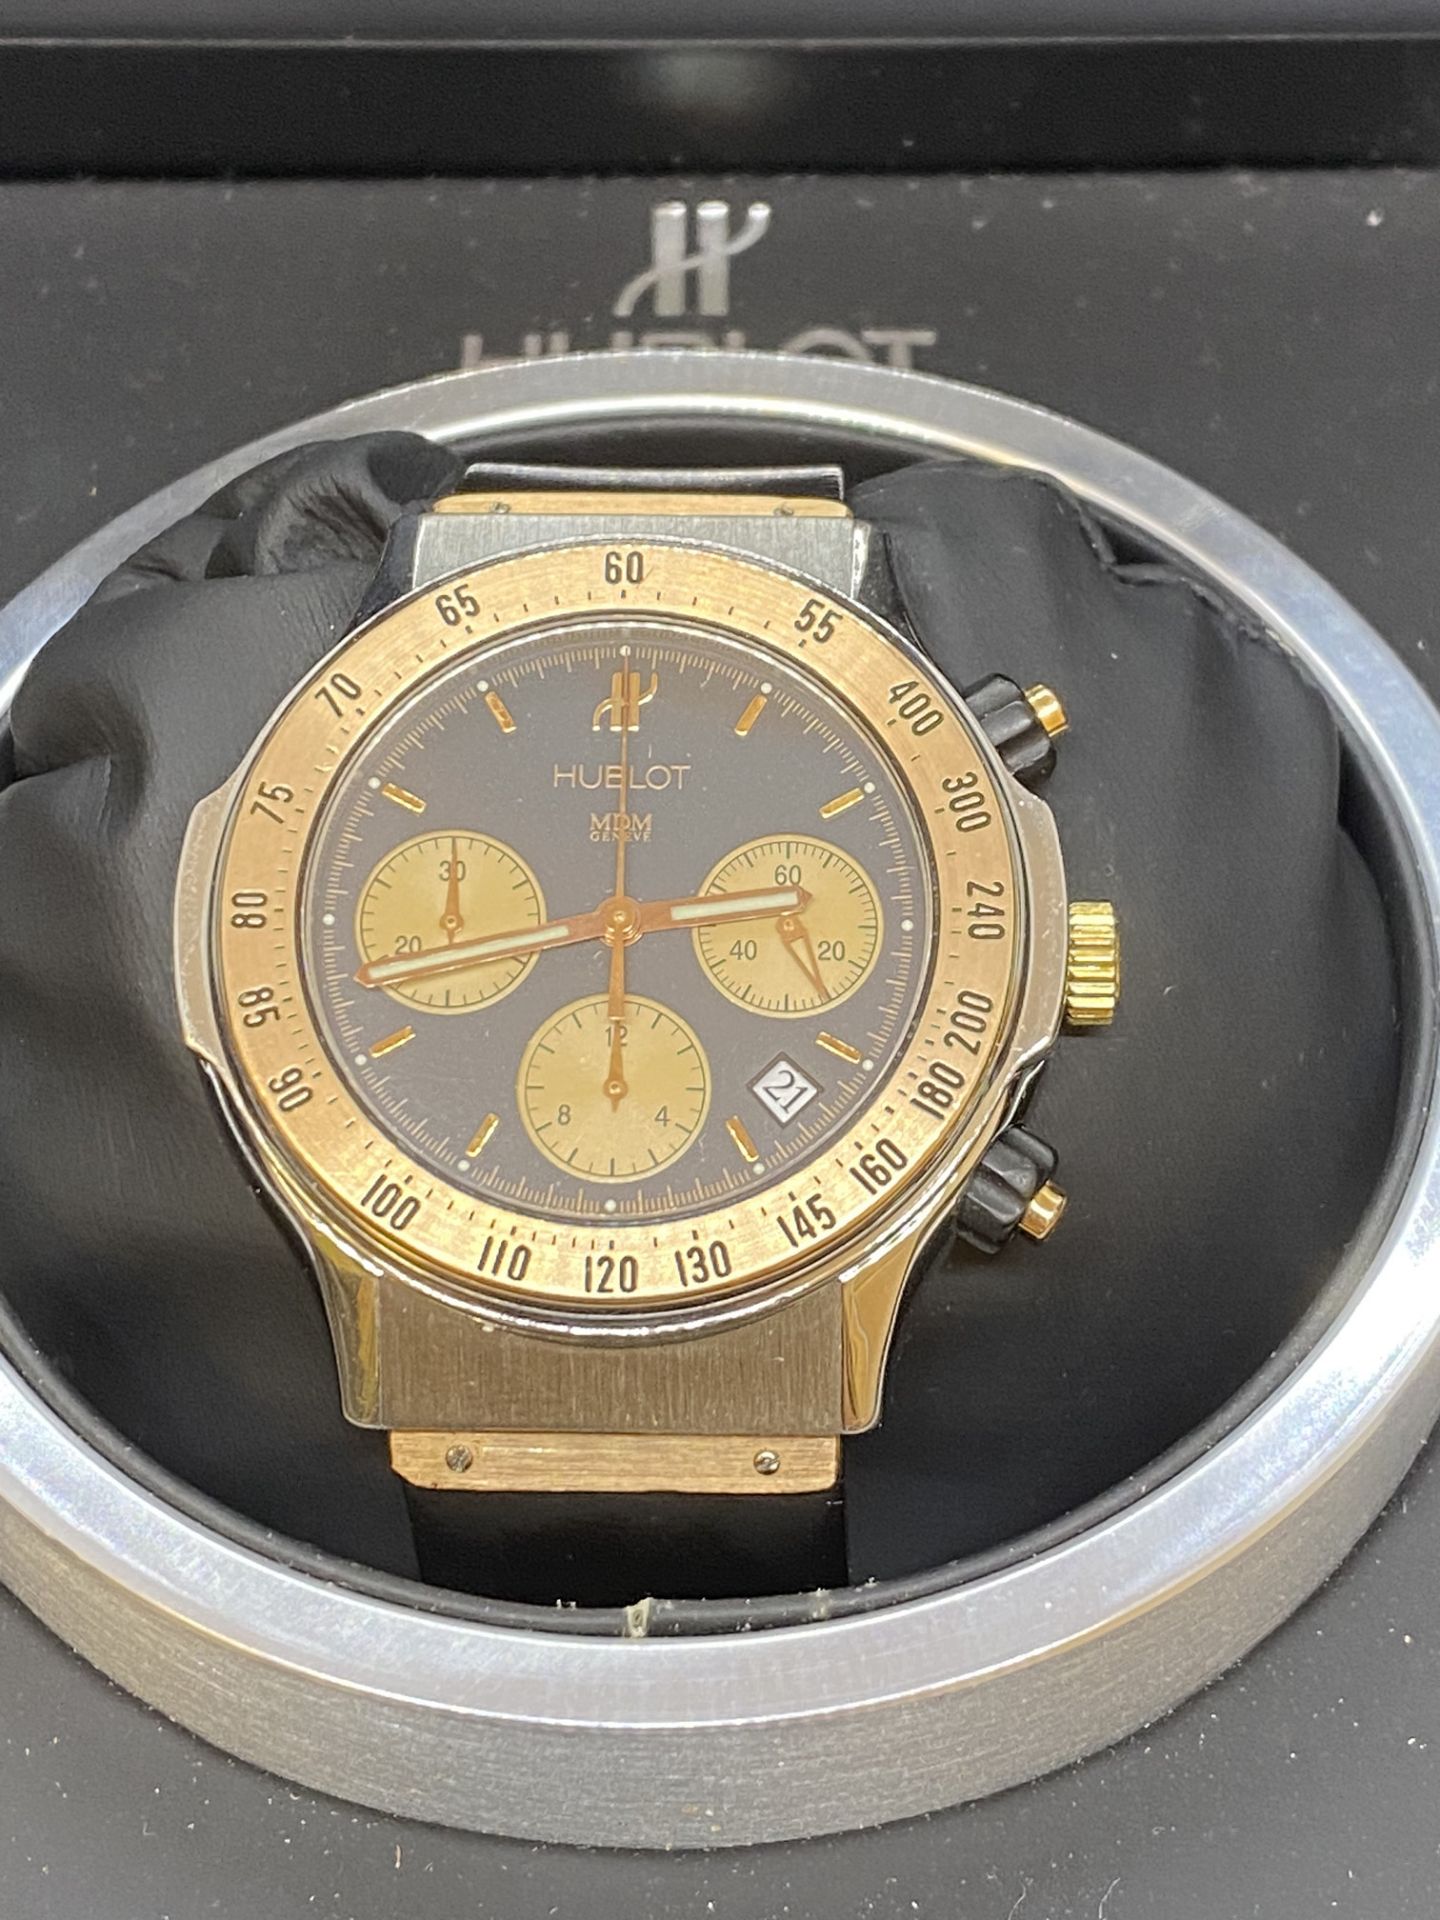 42mm HUBLOT SUPER B CHRONOGRAPH STAINLESS STEEL/18K ROSE GOLD 1920.7 WITH BOX & AUTHENTICITY CARD - Image 9 of 16